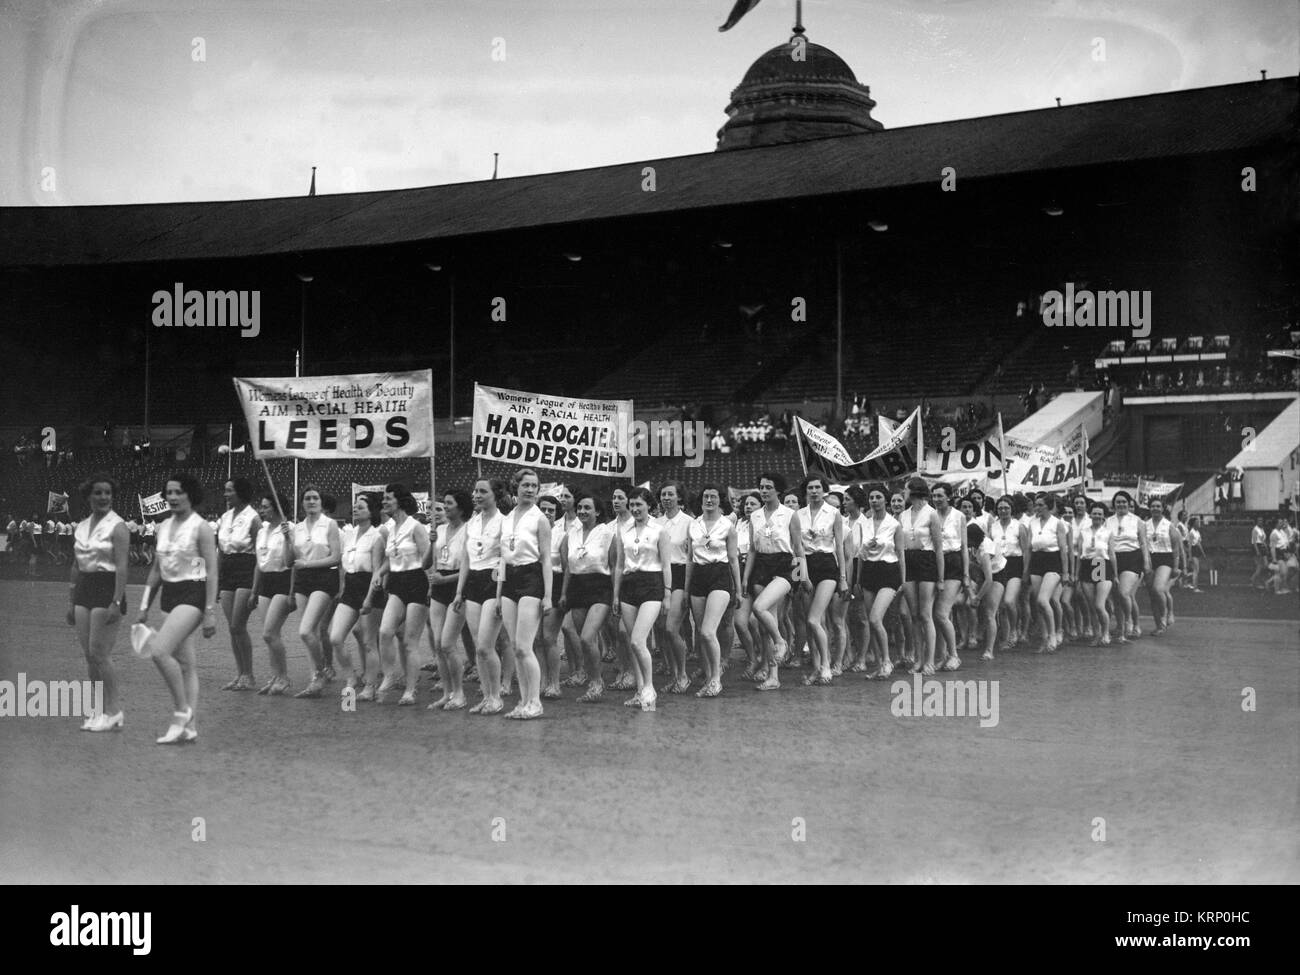 Demonstration by The Women's League of Health and Beauty, during the 1930s. Shows banners relating to  the Leeds, Harrogate, Huddersfield, and Dunstable branches. Demonstration inside a sports stadium, possibly Wembley. Stock Photo